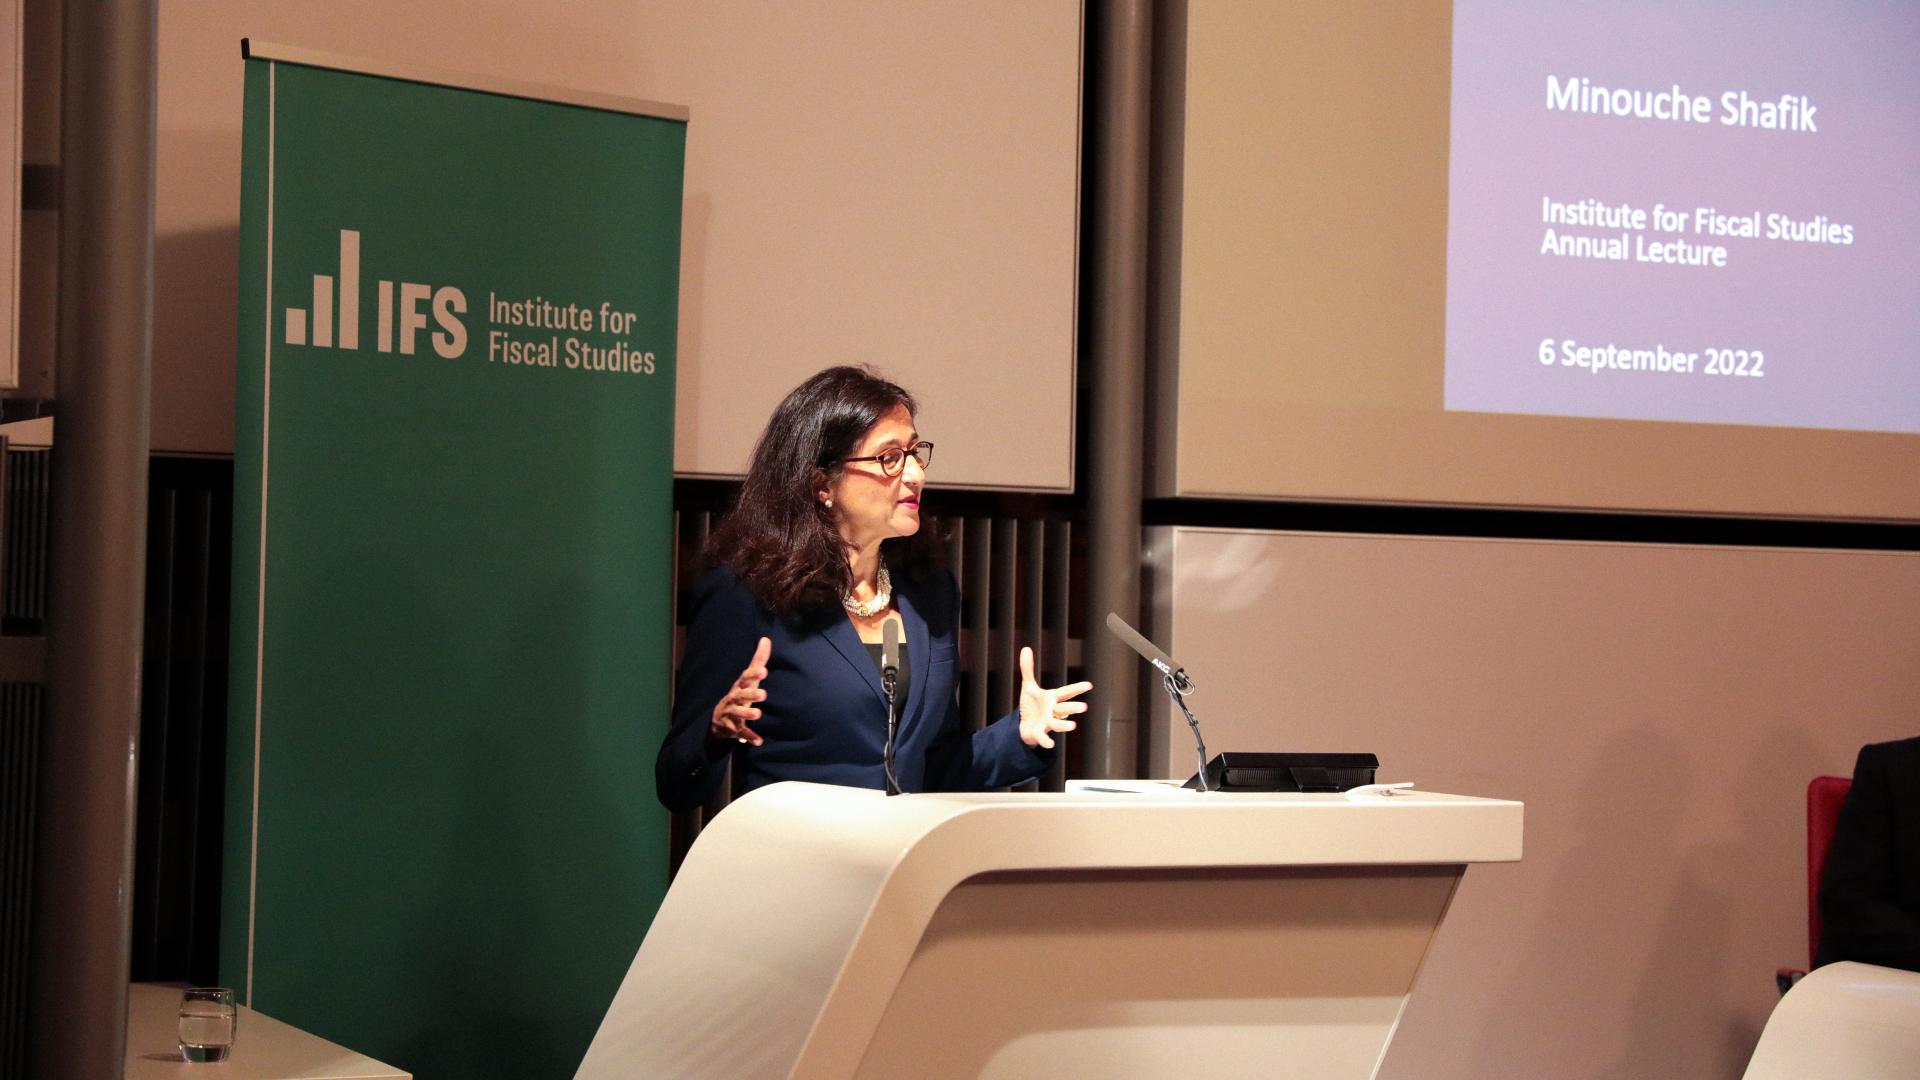 Image of Baroness Minouche Shafik presenting at the IFS Annual Lecture